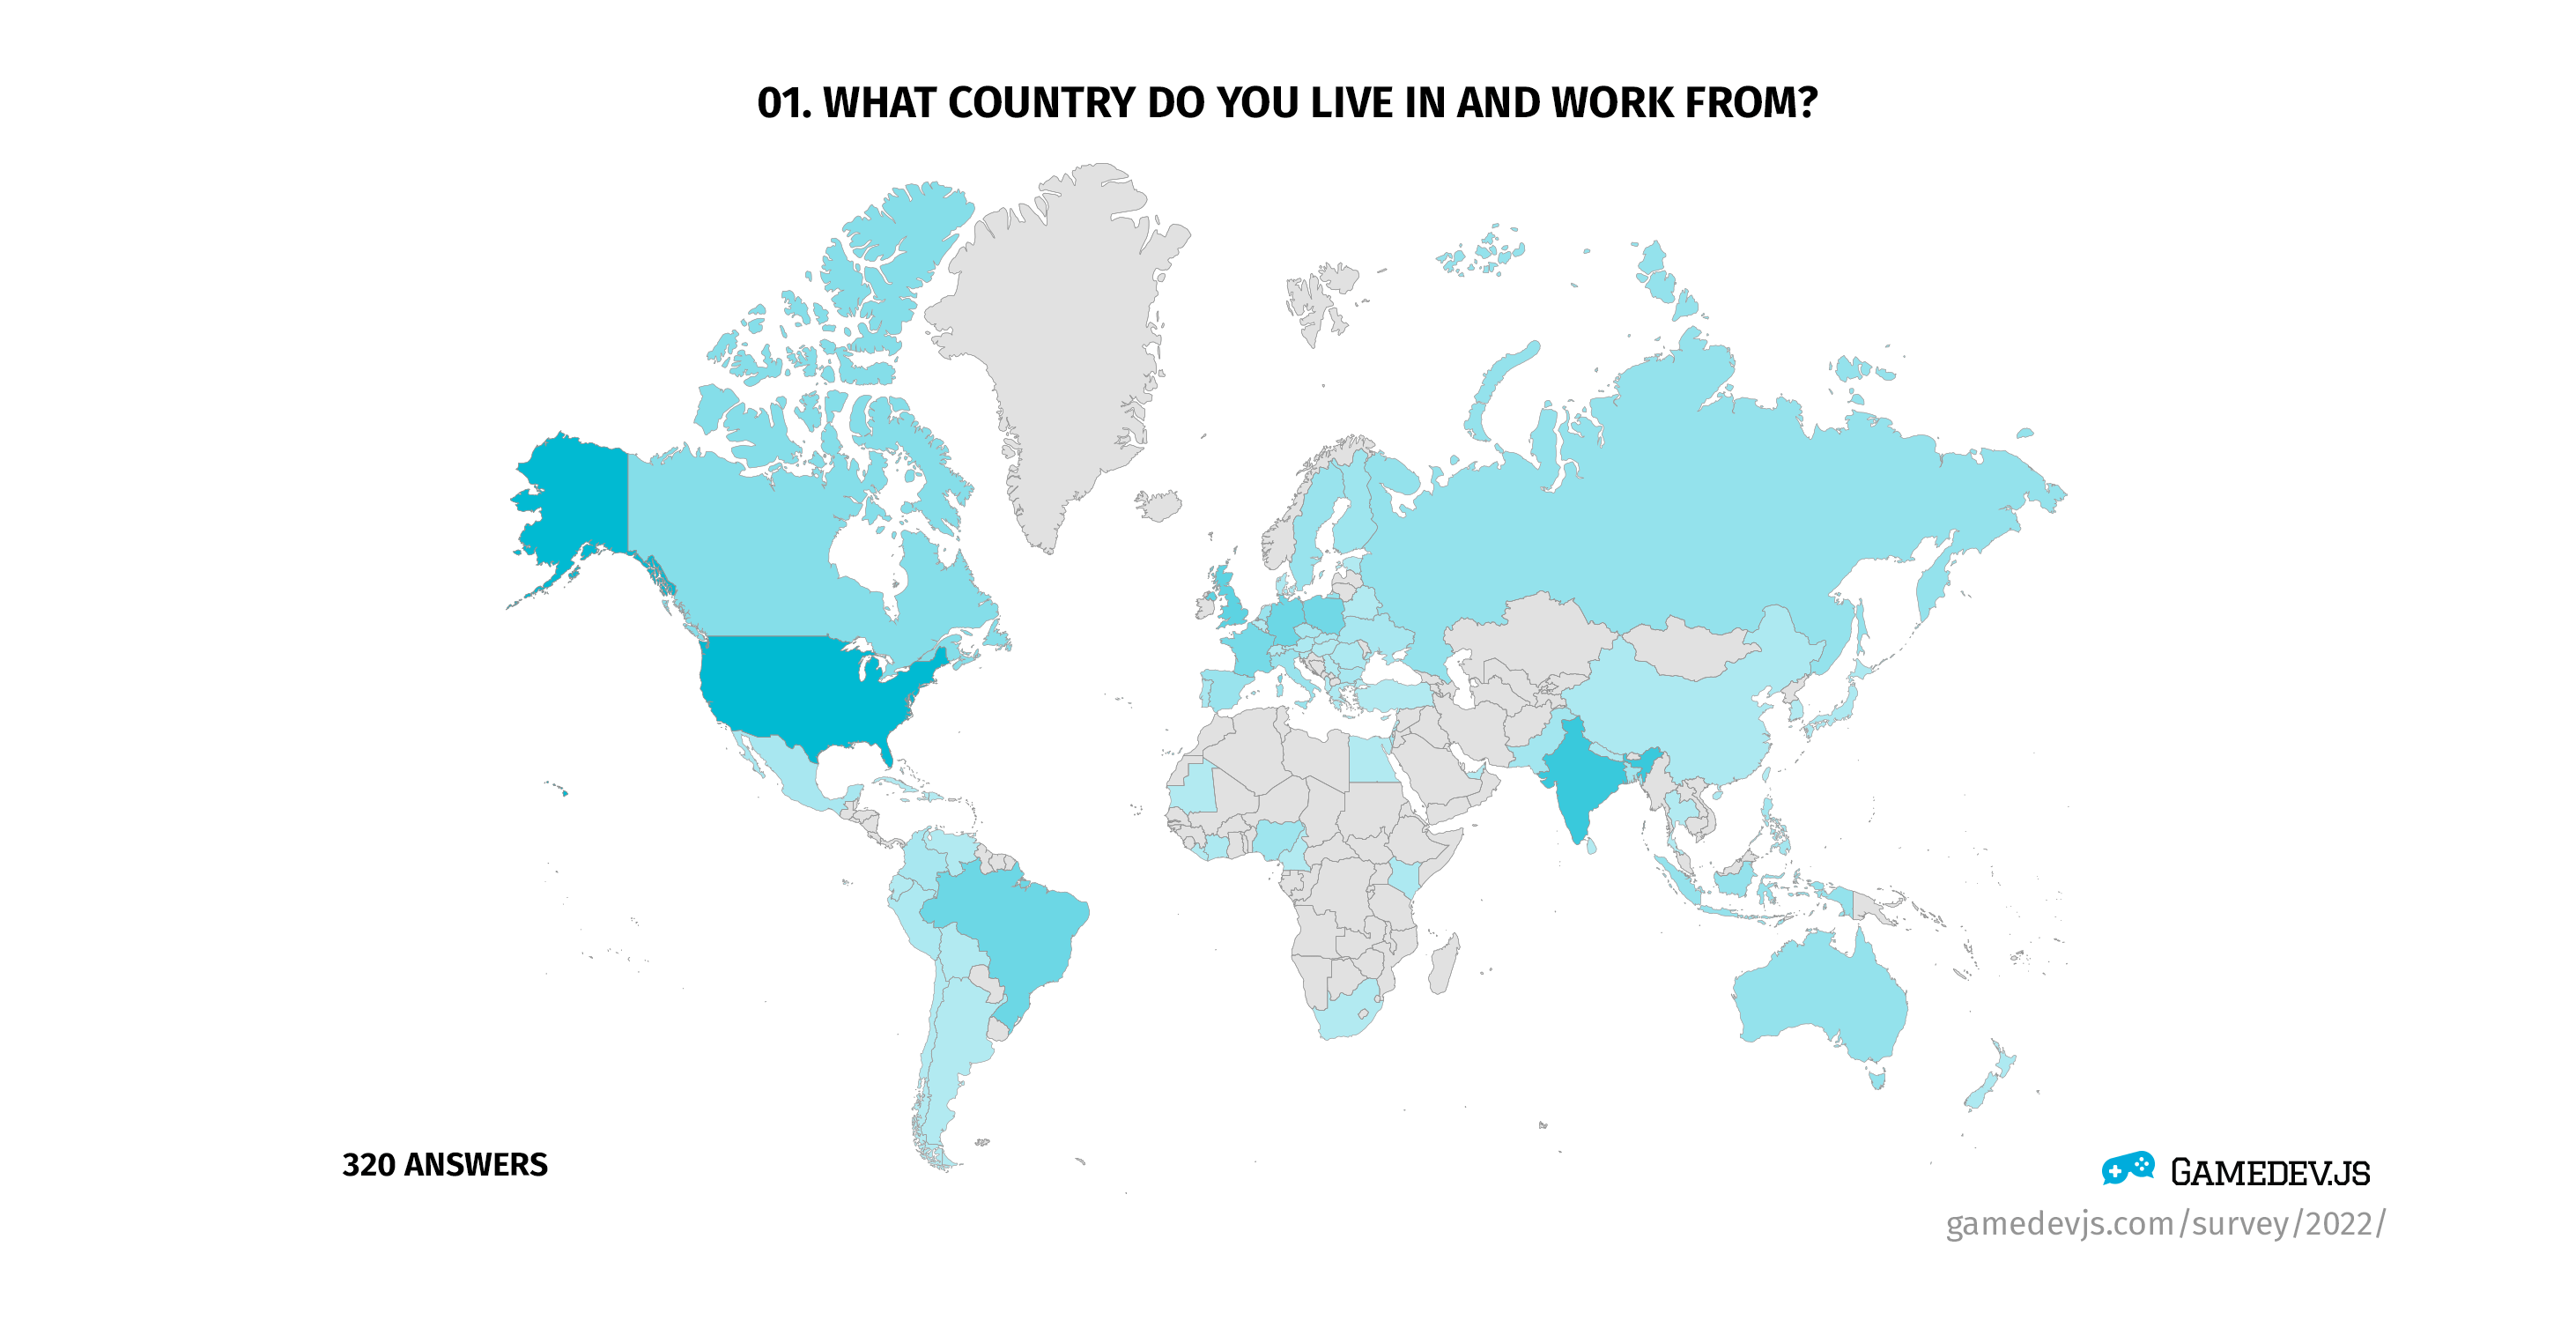 Gamedev.js Survey 2022: What country do you live in and work from?